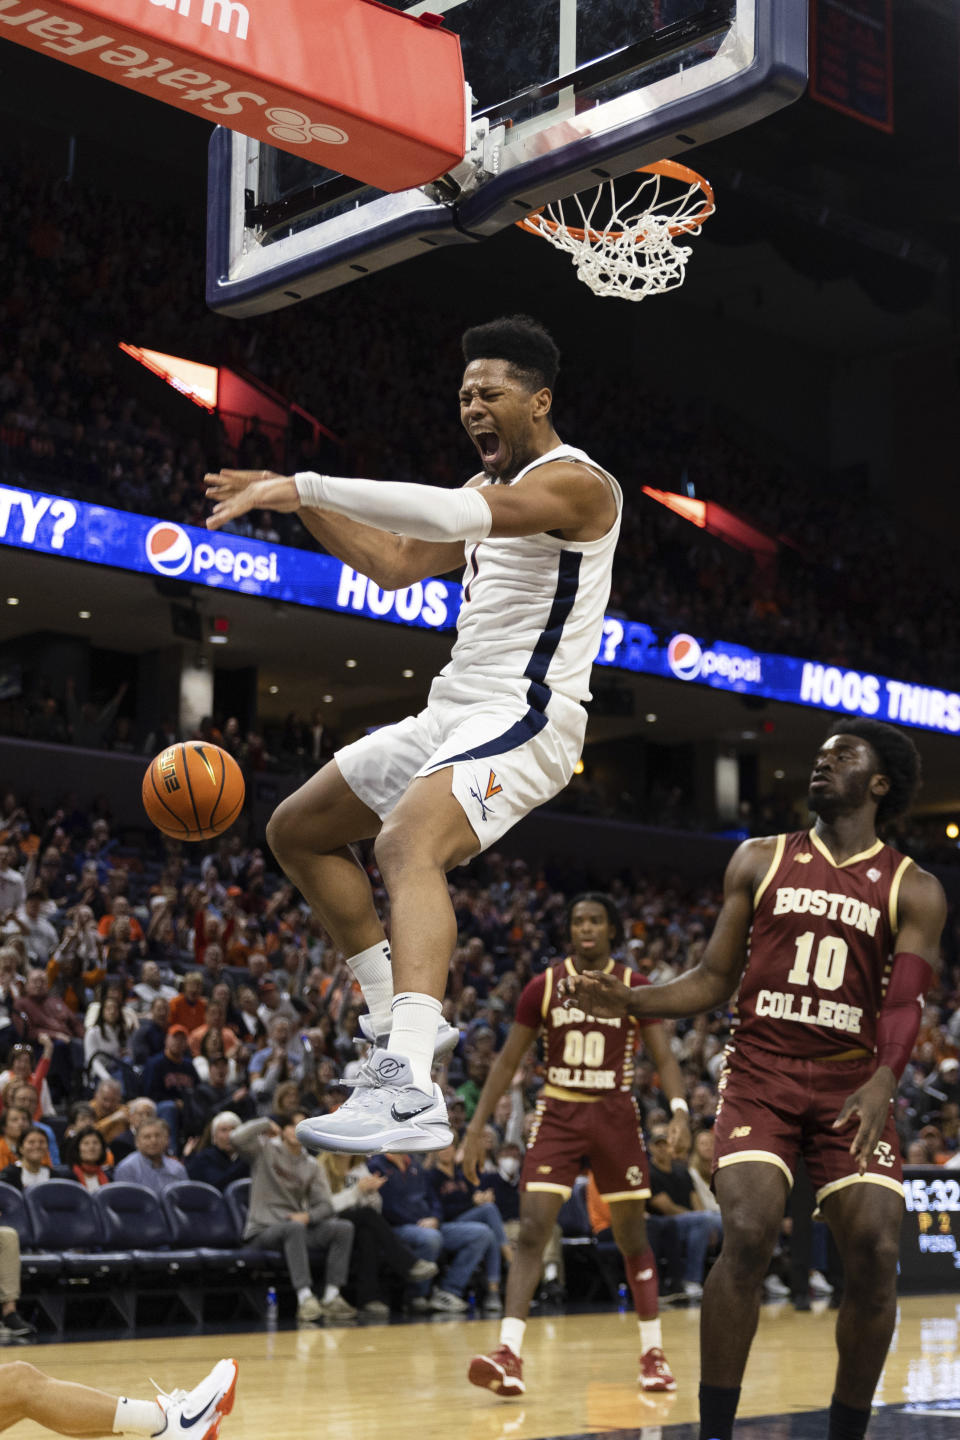 Virginia's Jayden Gardner reacts after a basket against Boston College during the second half of an NCAA college basketball game in Charlottesville, Va., Saturday, Jan. 28, 2023. (AP Photo/Mike Kropf)